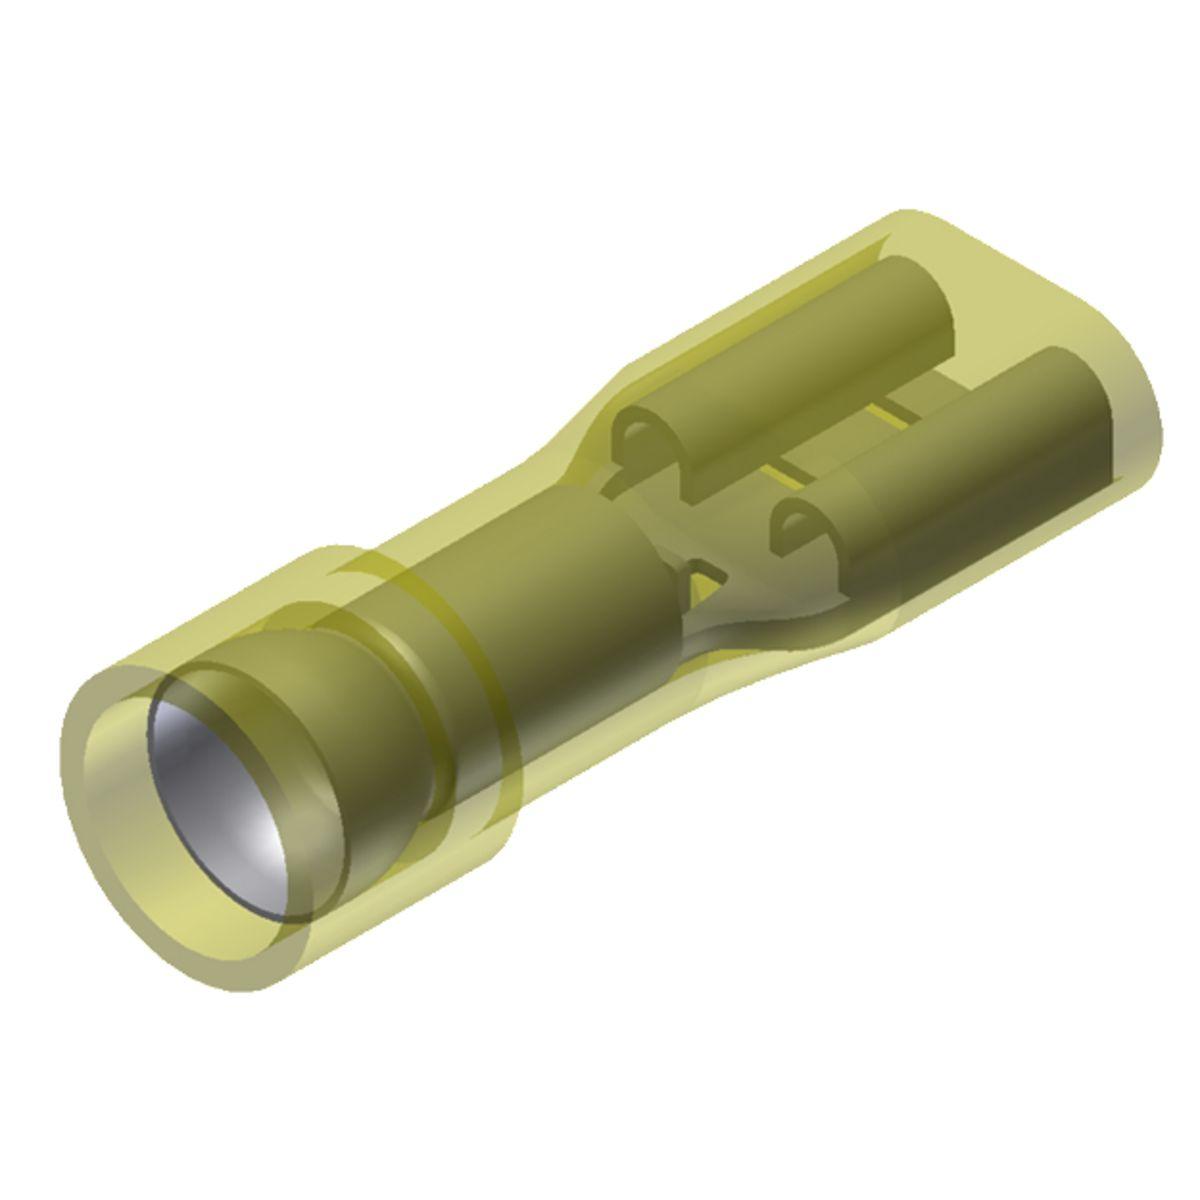 Hubbell FQN10F25X03D Fully Insulated Nylon Female Quick Disconnect For 12 - 10 AWG (.25 x .03).  ; Features: Fully Insulated Connectors: Eliminate The Need For Post Installation Insulation, Funnel Entry Barrel Opening: Assures Quick And Easy Wire Insertion, Dimpled Female Soc